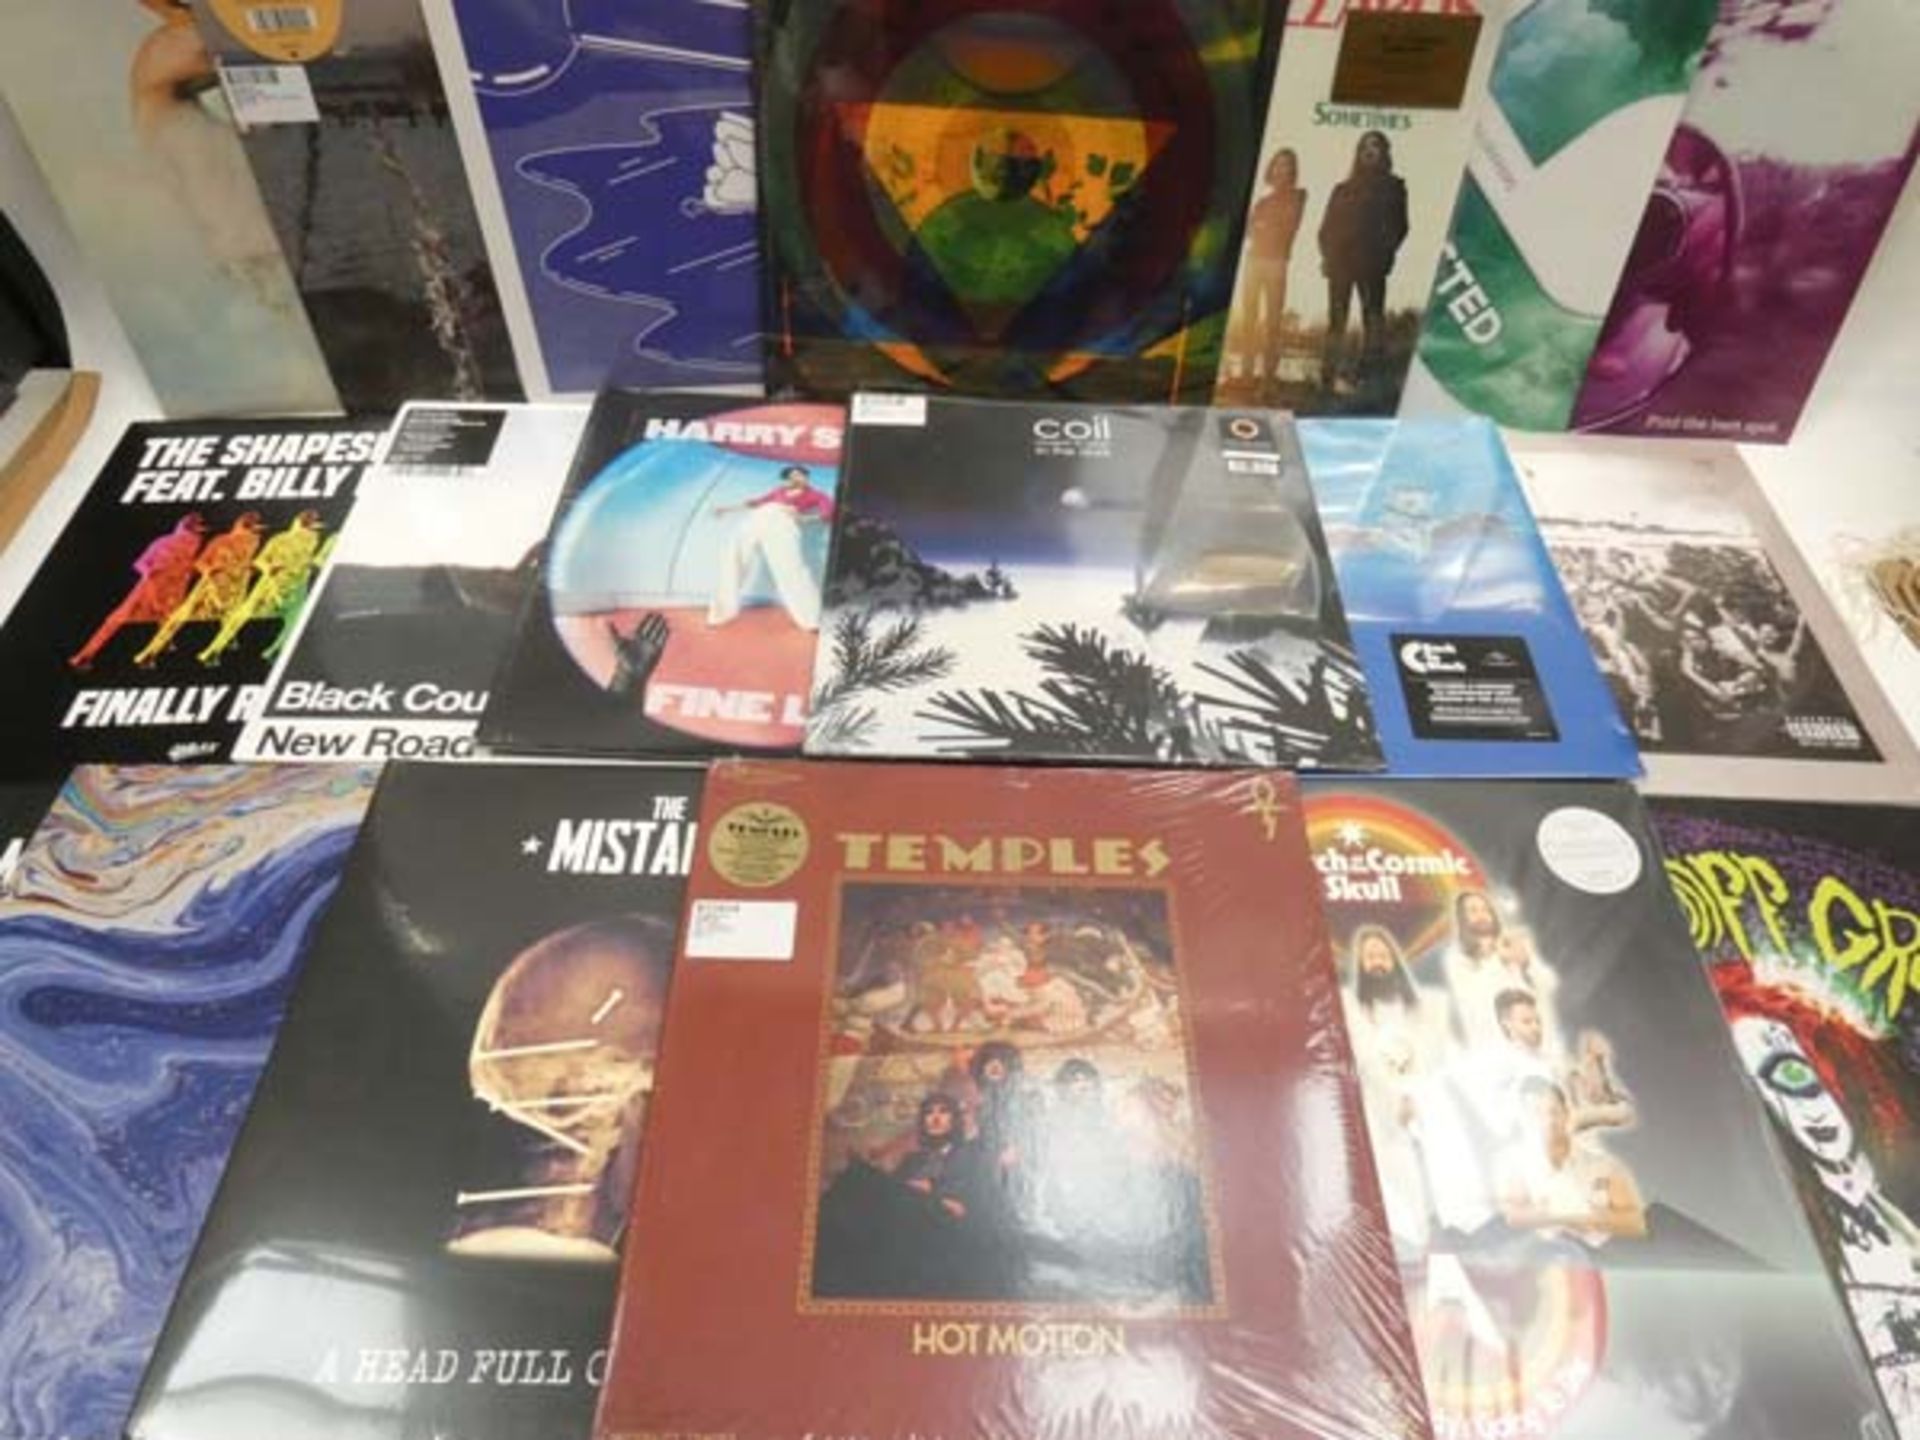 Box containing quantity of LP and 45 records to include Nirvana, Coil, Church of the Cosmic Skull,